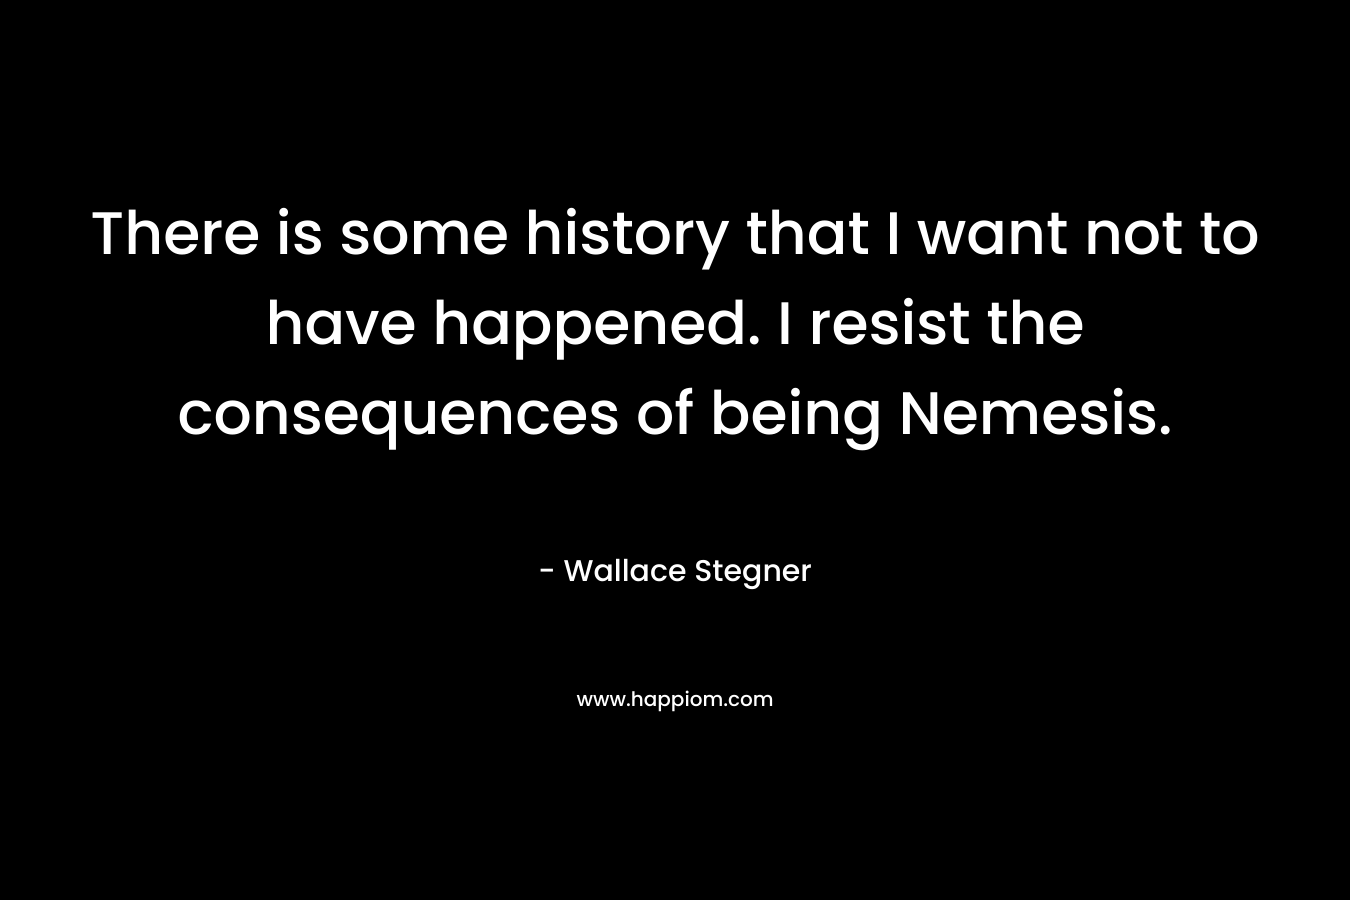 There is some history that I want not to have happened. I resist the consequences of being Nemesis. – Wallace Stegner